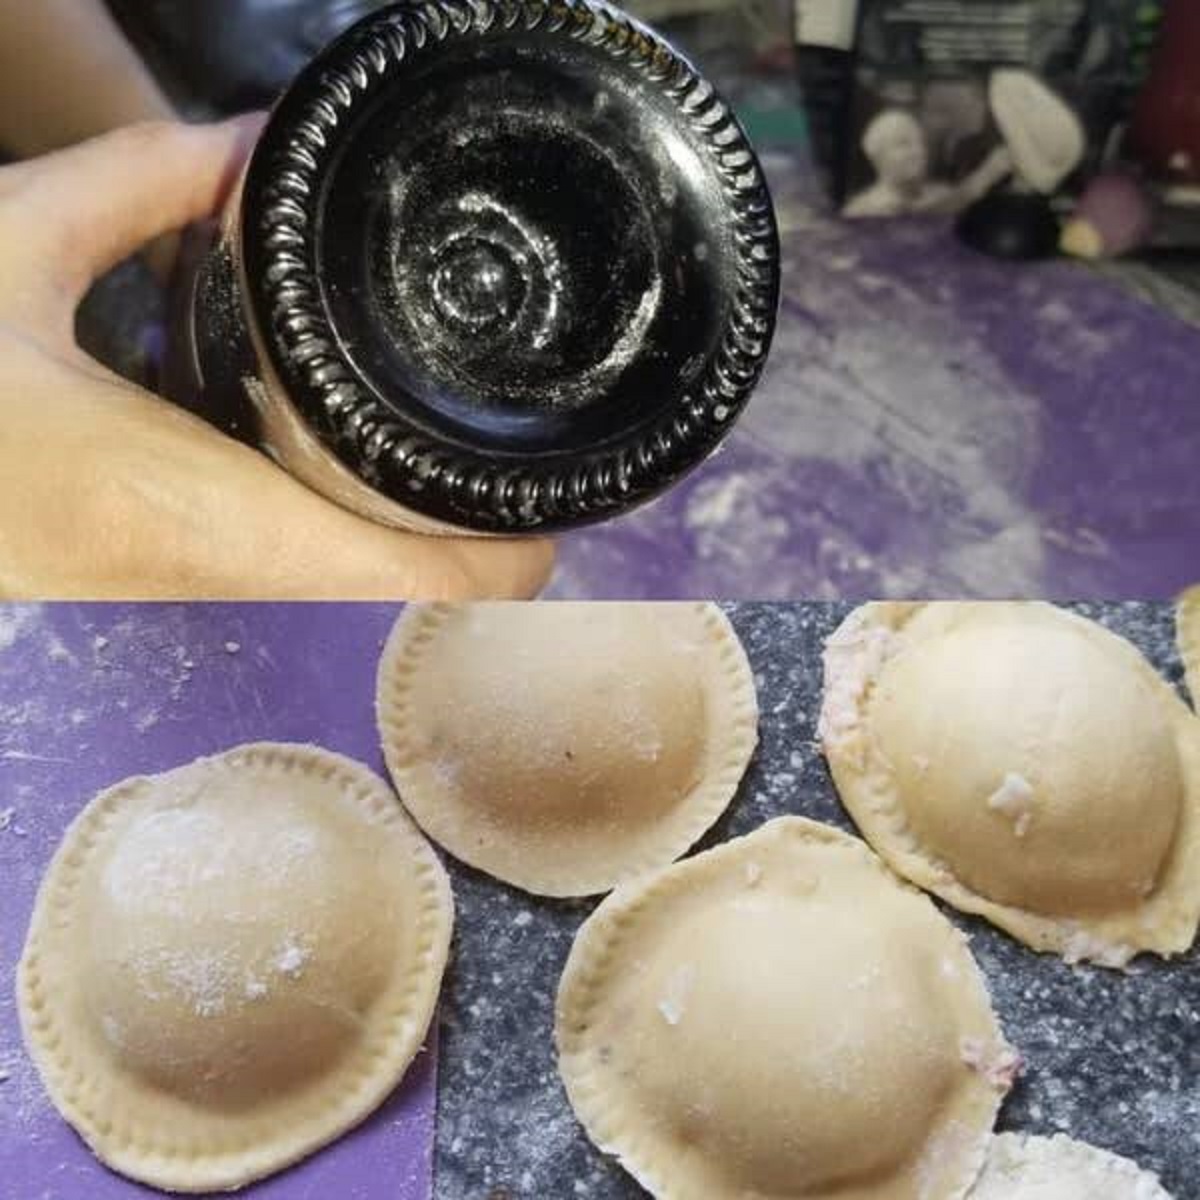 "You can use the bottom of some wine bottles as a homemade ravioli press. The bottom of this J. Lohr wine bottle (as well as any similar-shaped bottle) makes a great press."